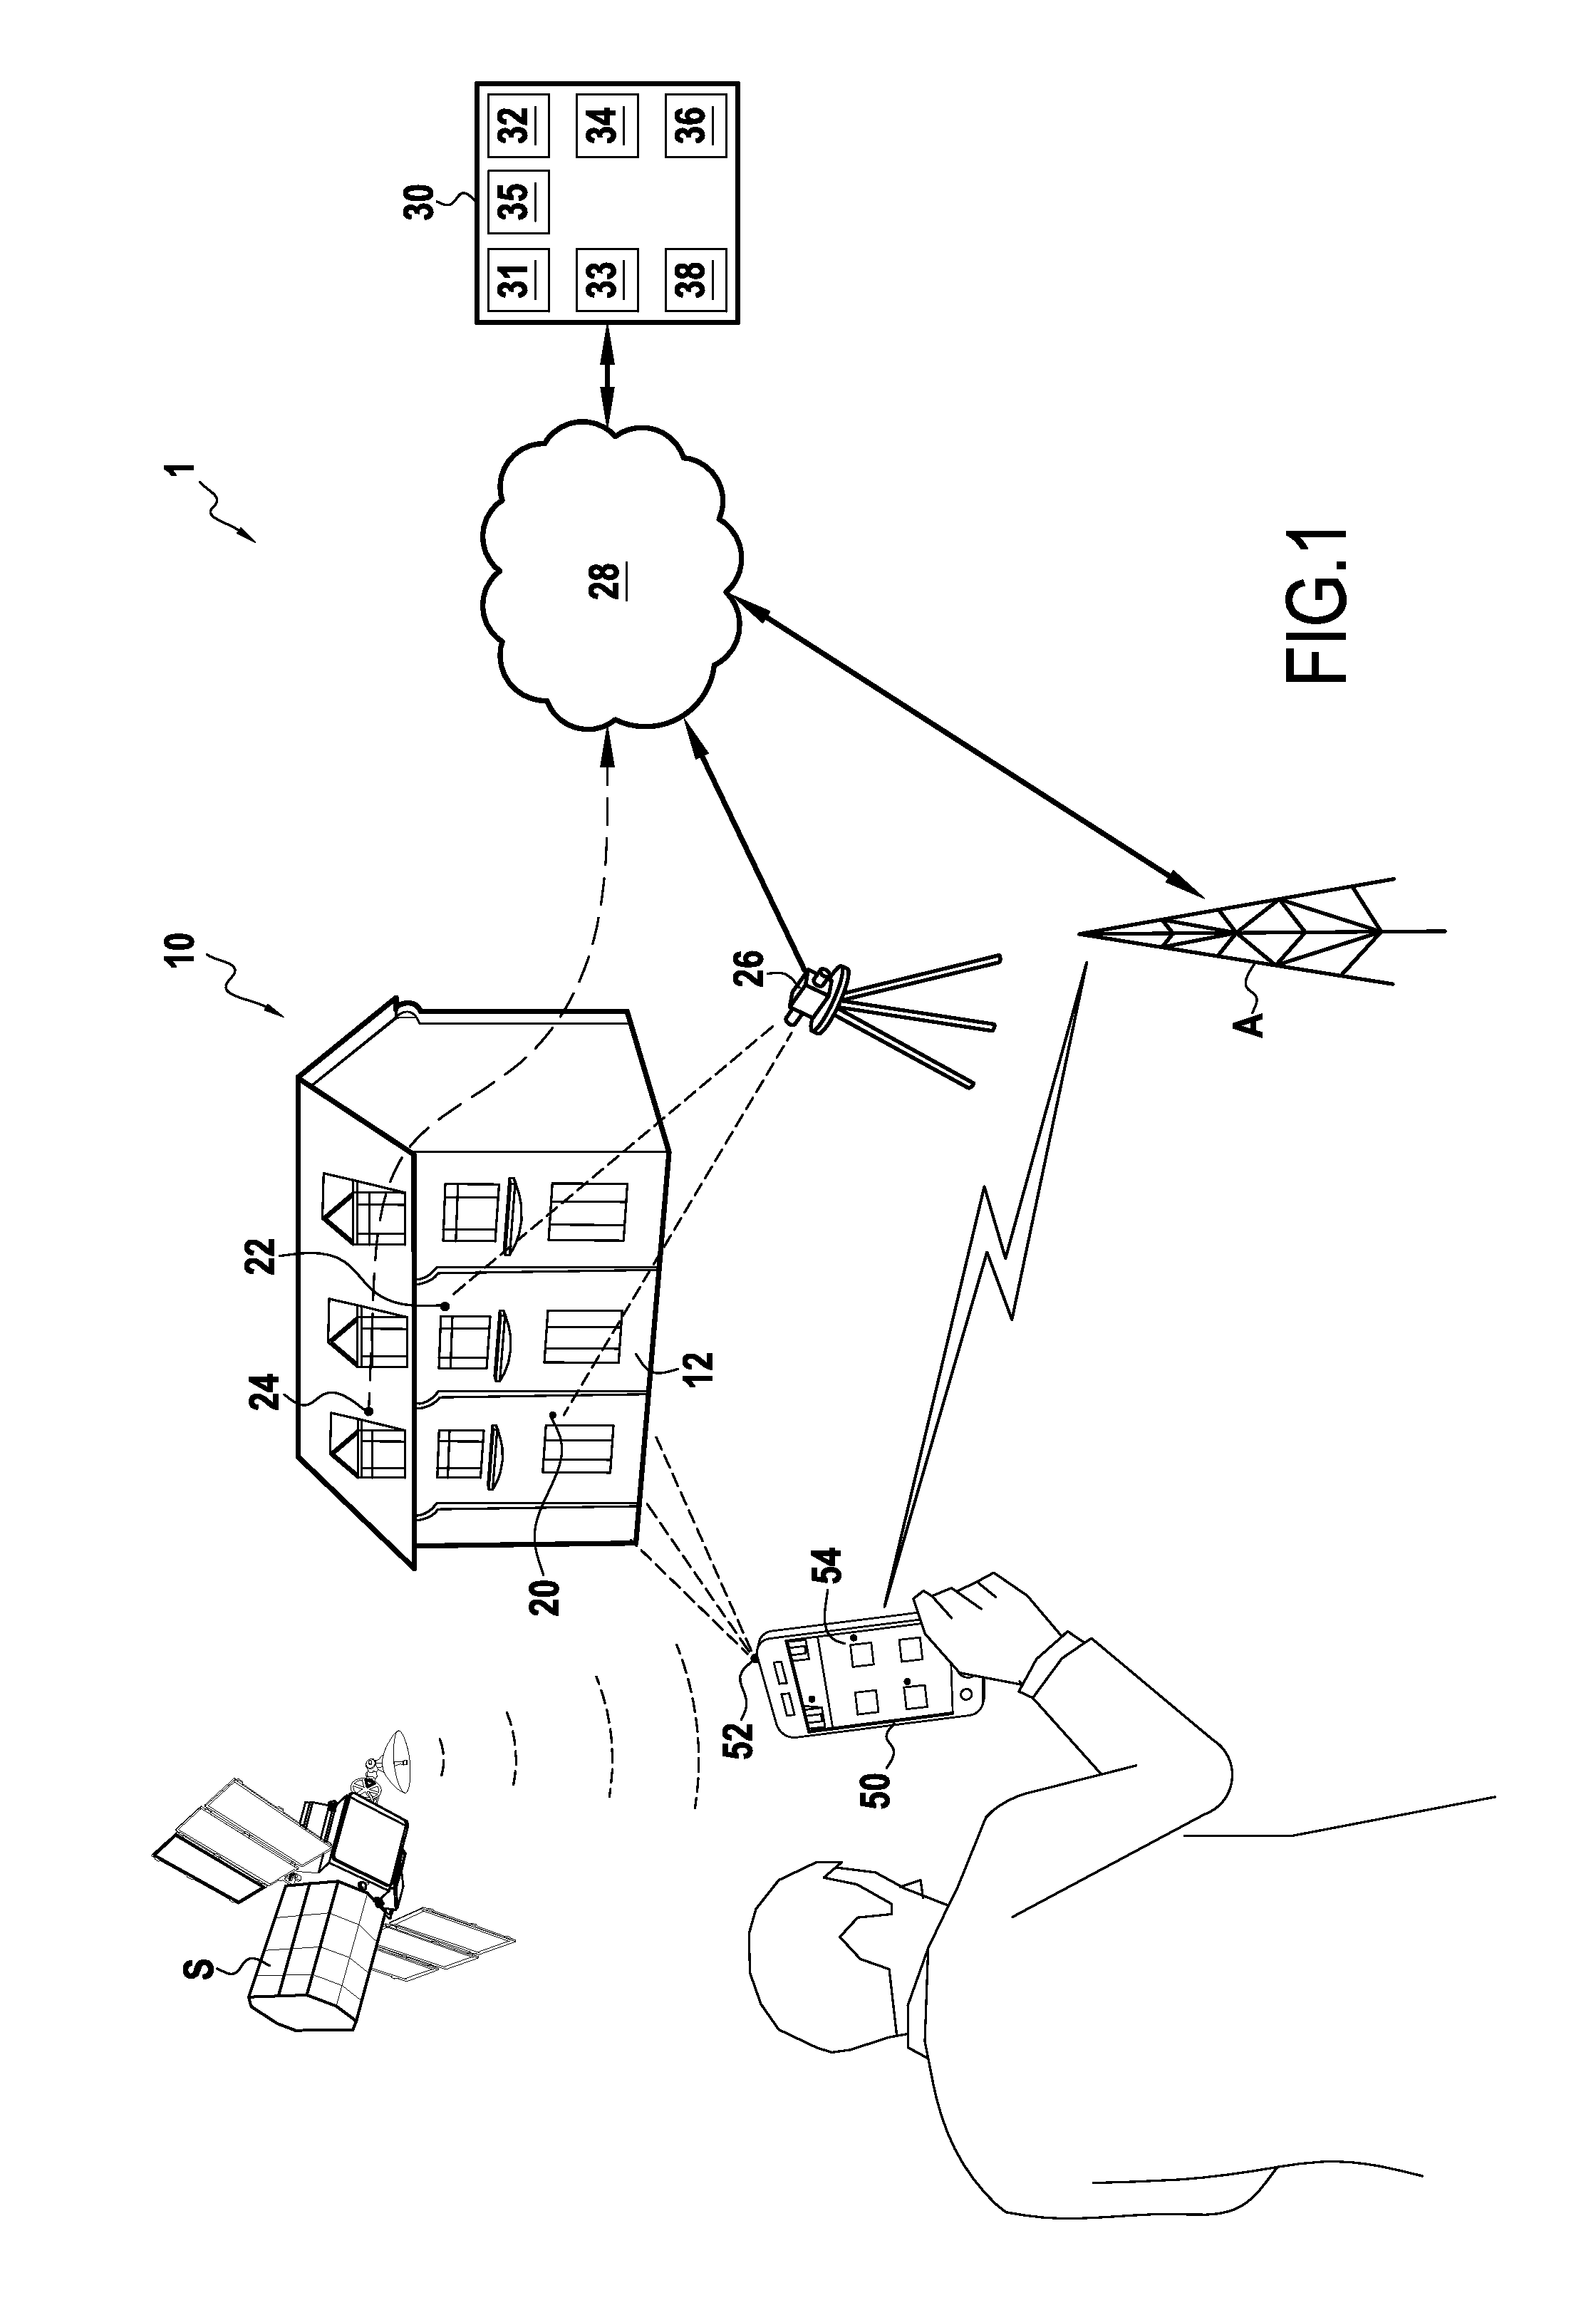 Method of representing possible movements of a structure for an apparatus of smartphone type